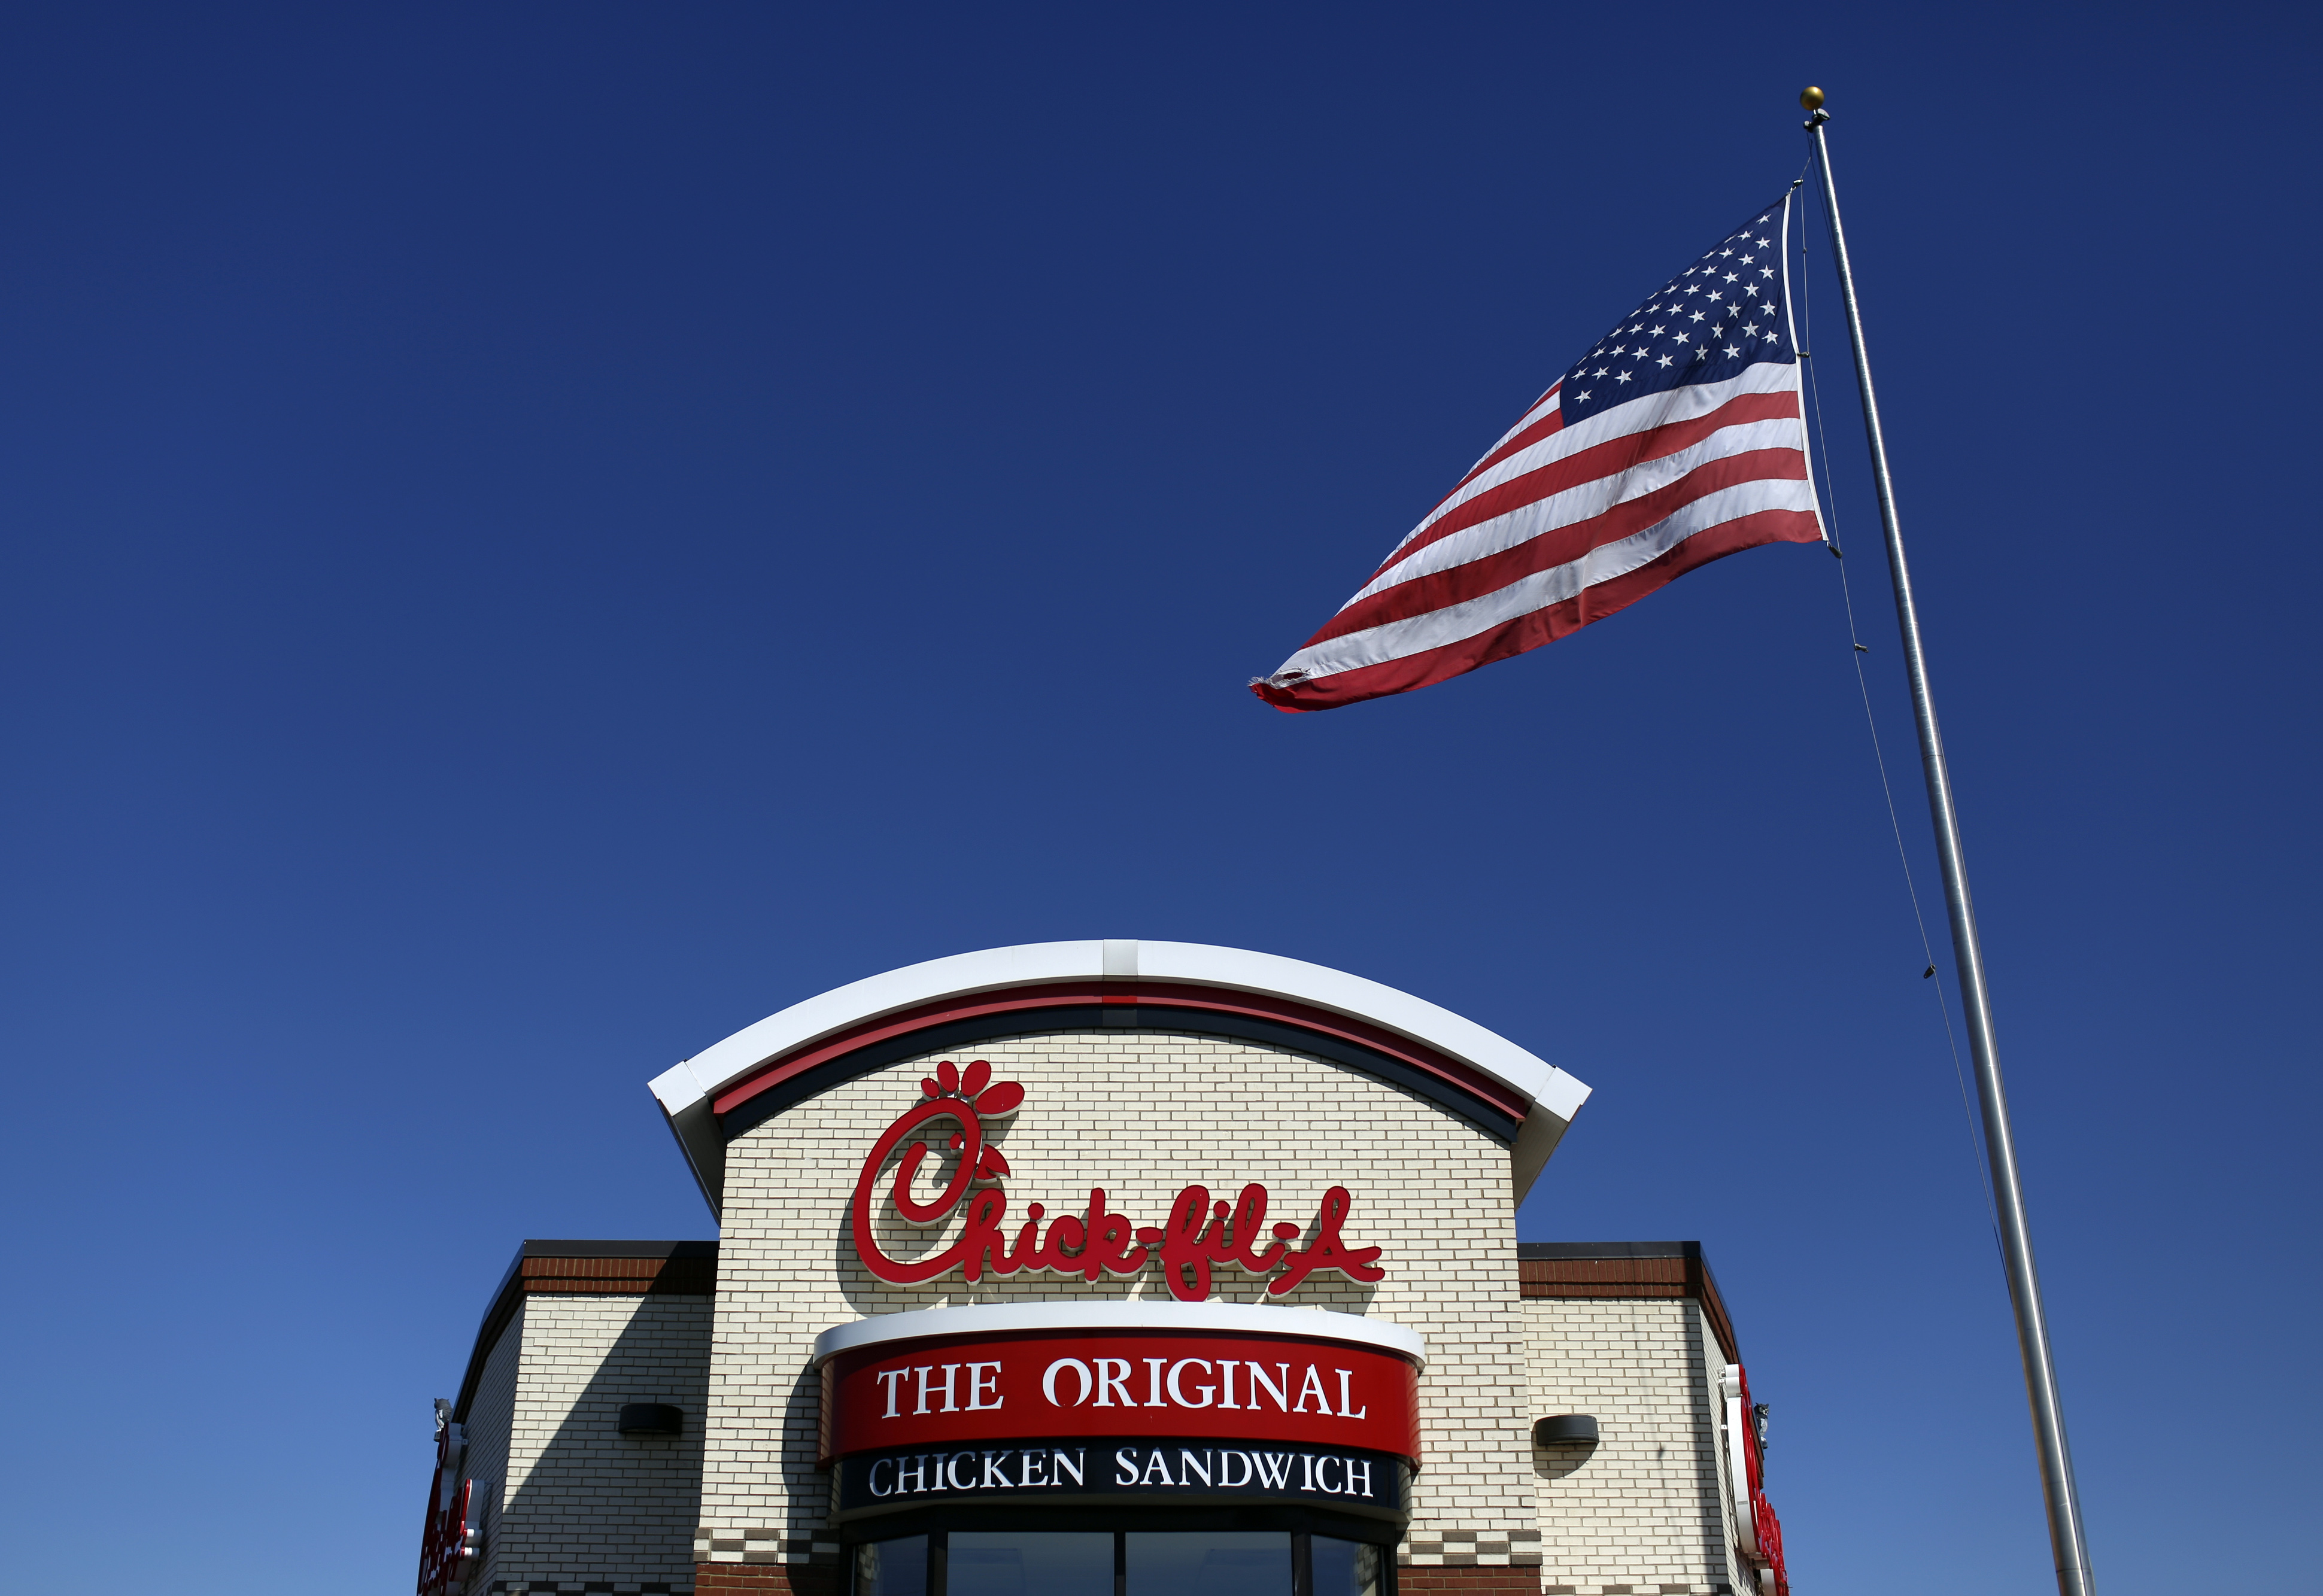 A U.S. flag flies outside a Chick-fil-A Inc. restaurant in Bowling Green, Kentucky, in March 2014. (Bloomberg via Getty Images)